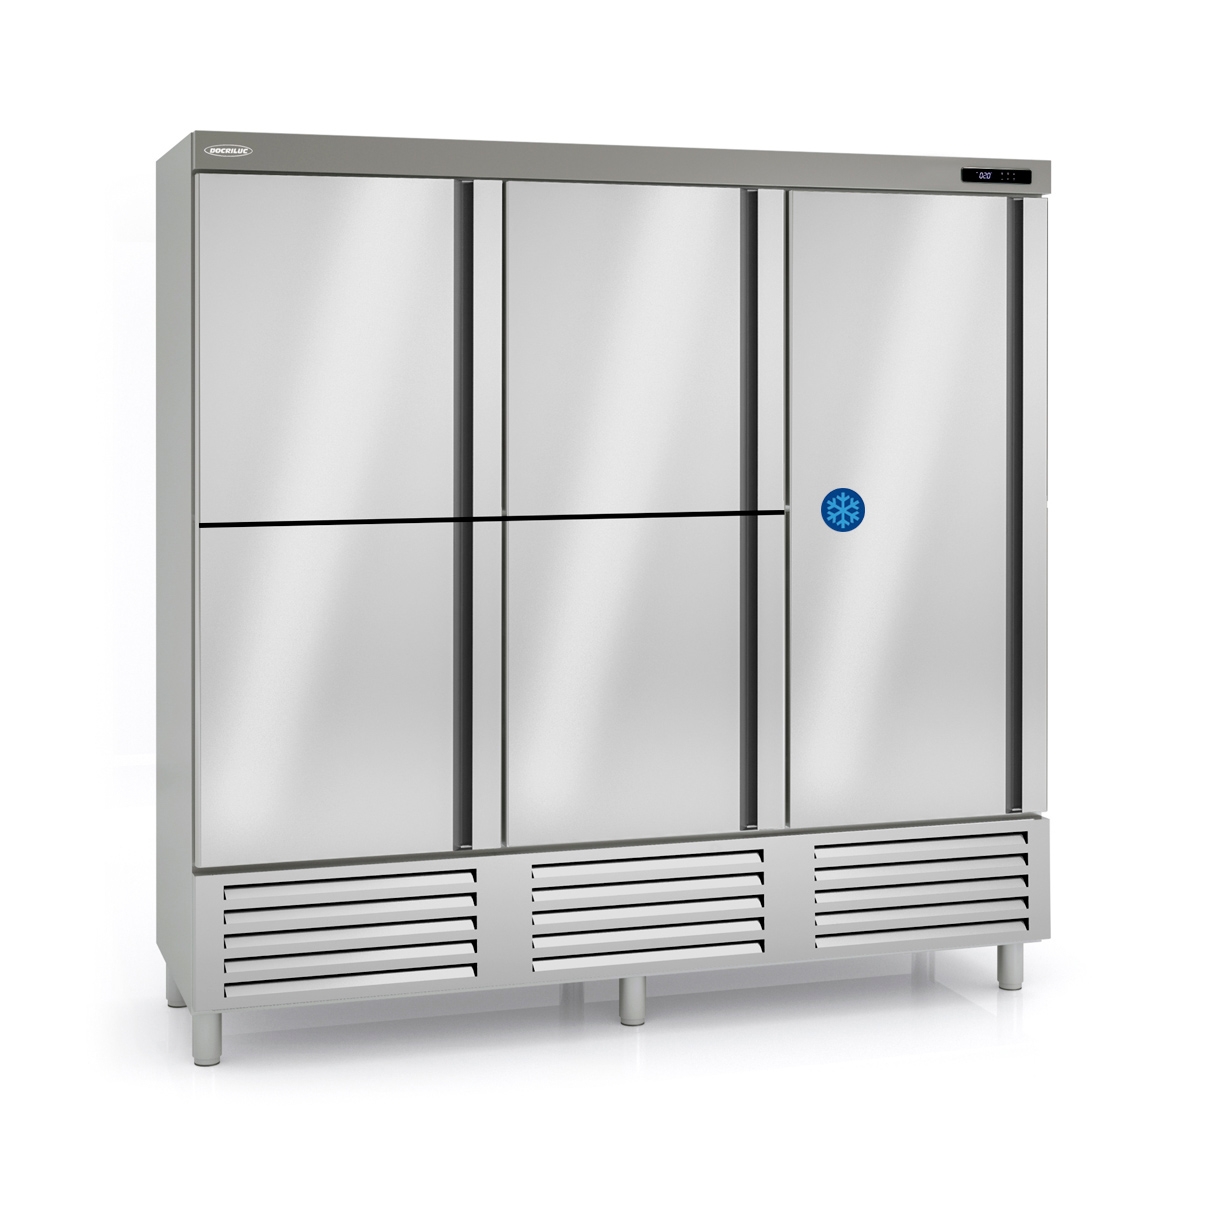 Snack Refrigerated Cabinet with Frozen Department ARSM-210-5